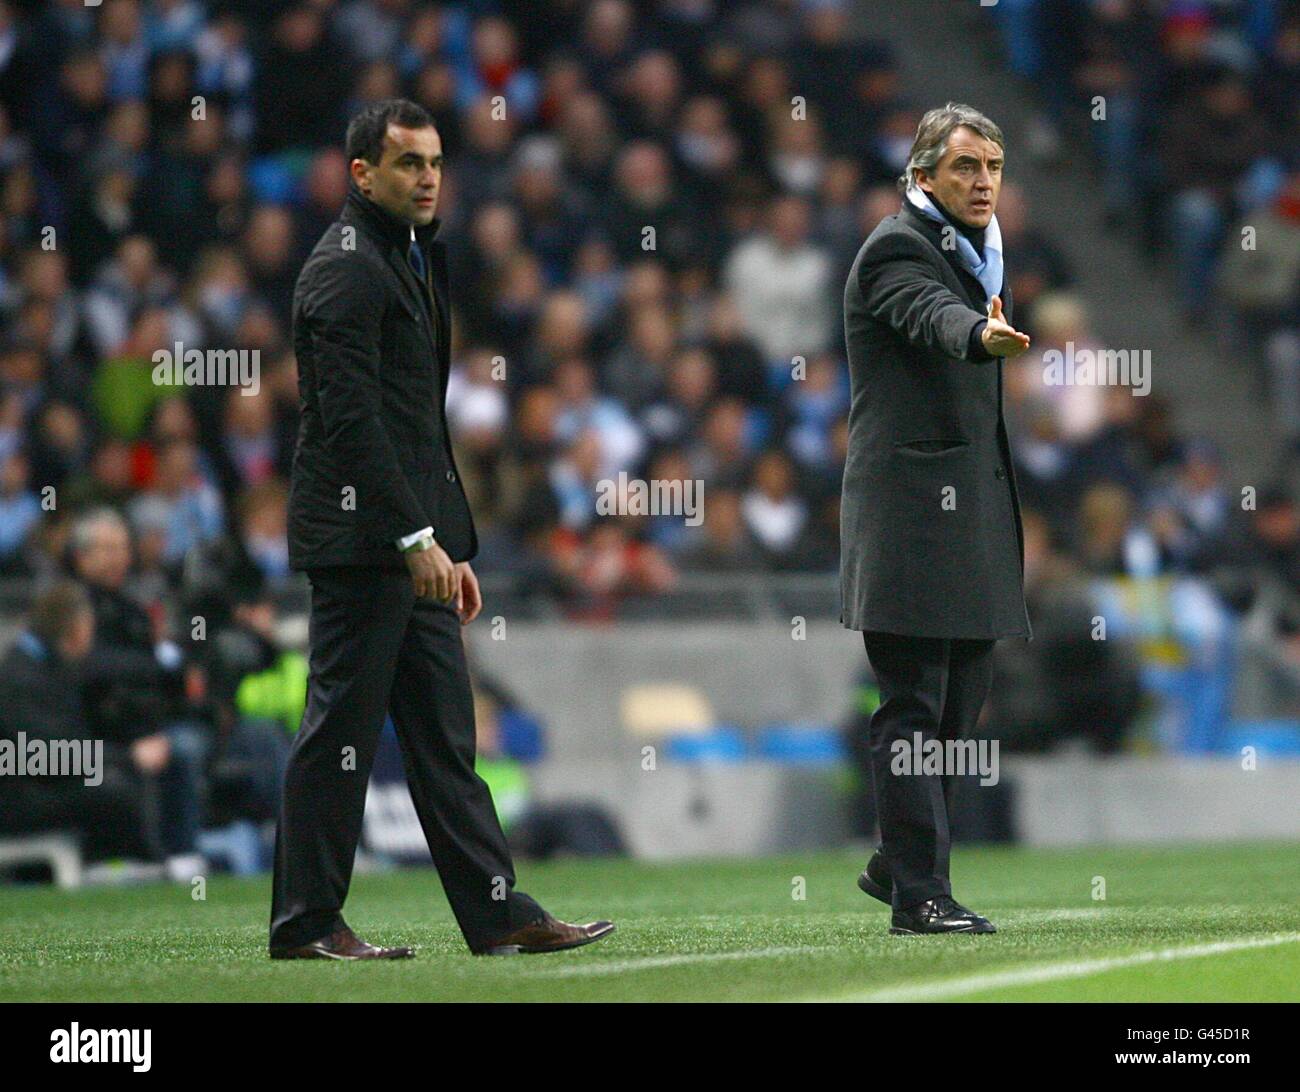 Wigan Athletic manager Roberto Martinez (left) and Manchester City manager Roberto Mancini (Right) on the touchline. Stock Photo